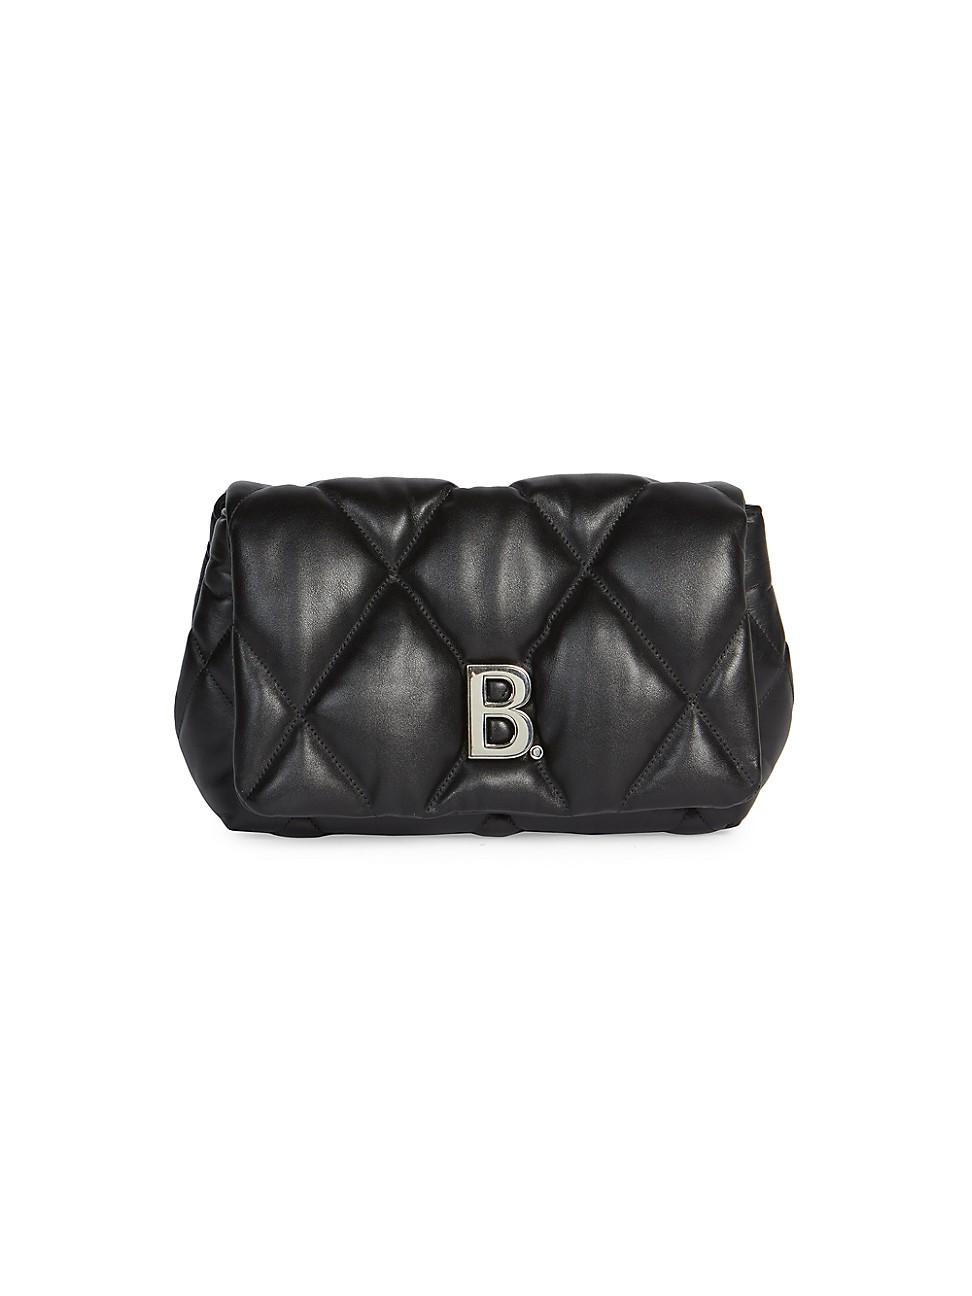 Balenciaga Touch Quilted Leather Clutch in Black - Lyst